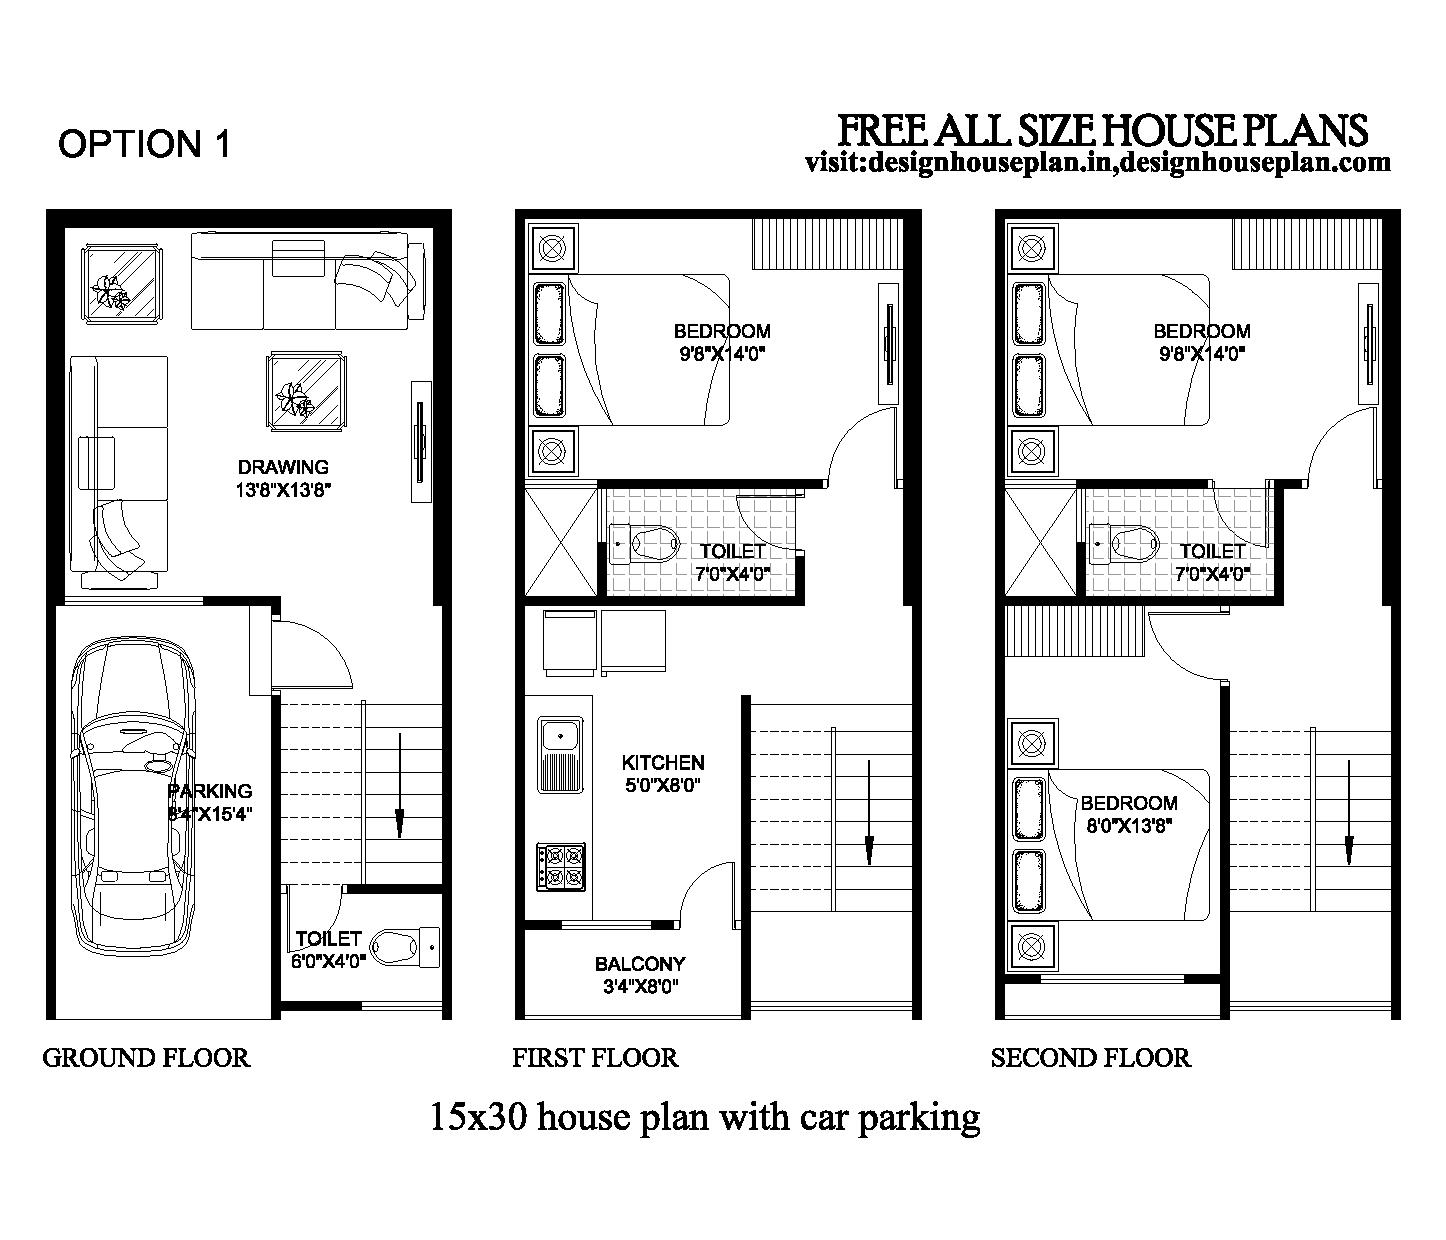 15x30 house plan with car parking